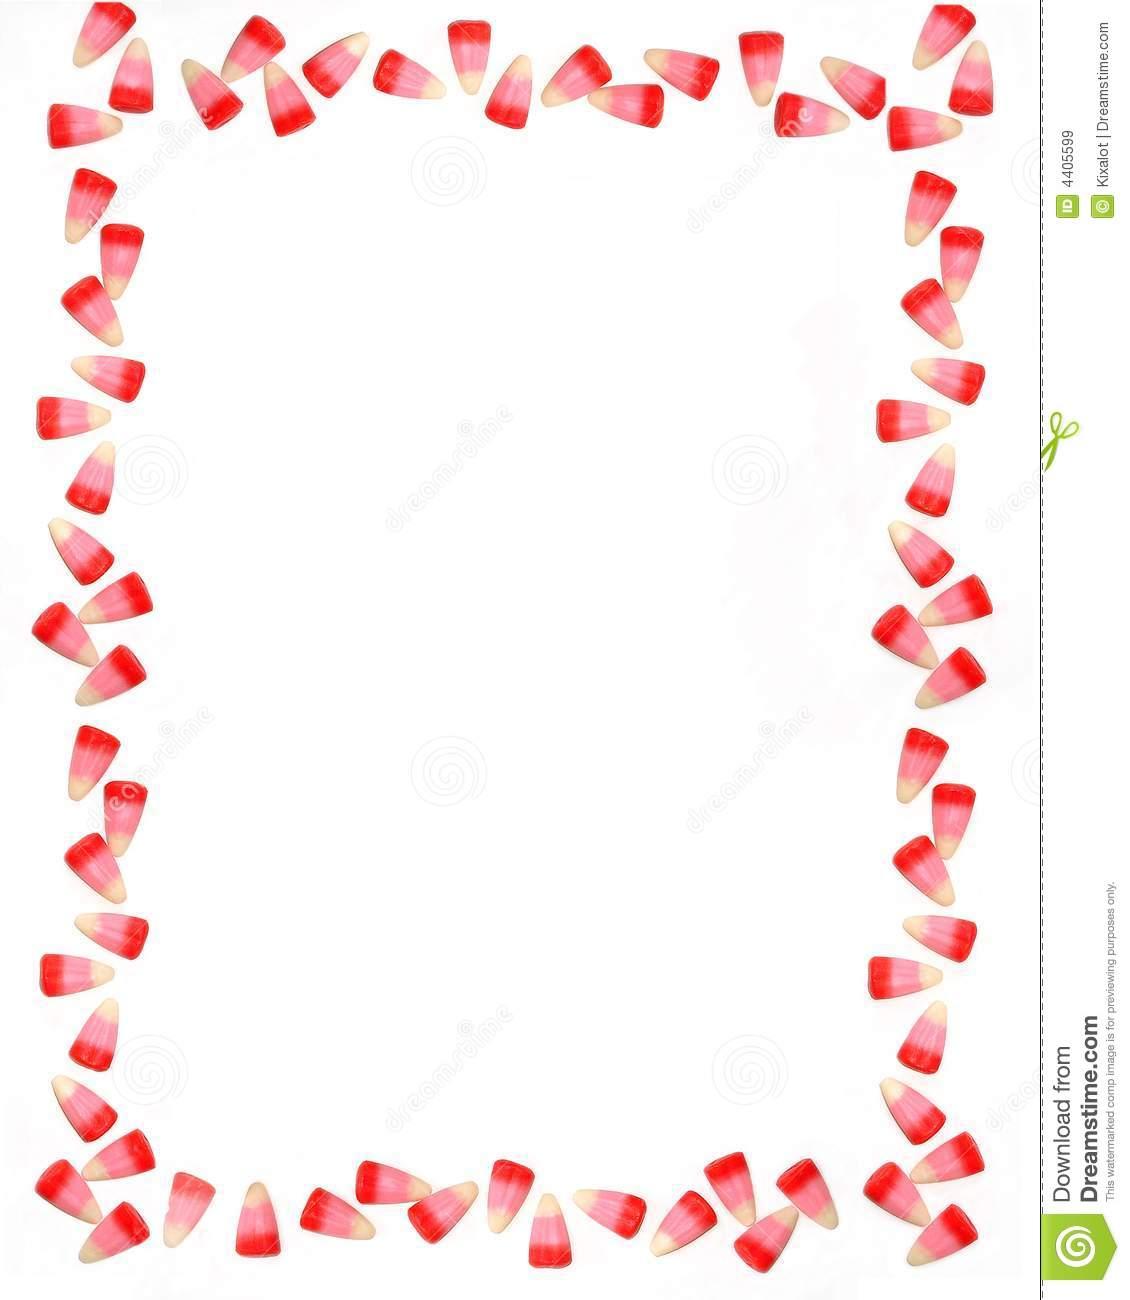 candy corn border perfect for valentine s day sweet candy frame j85L25 clipart